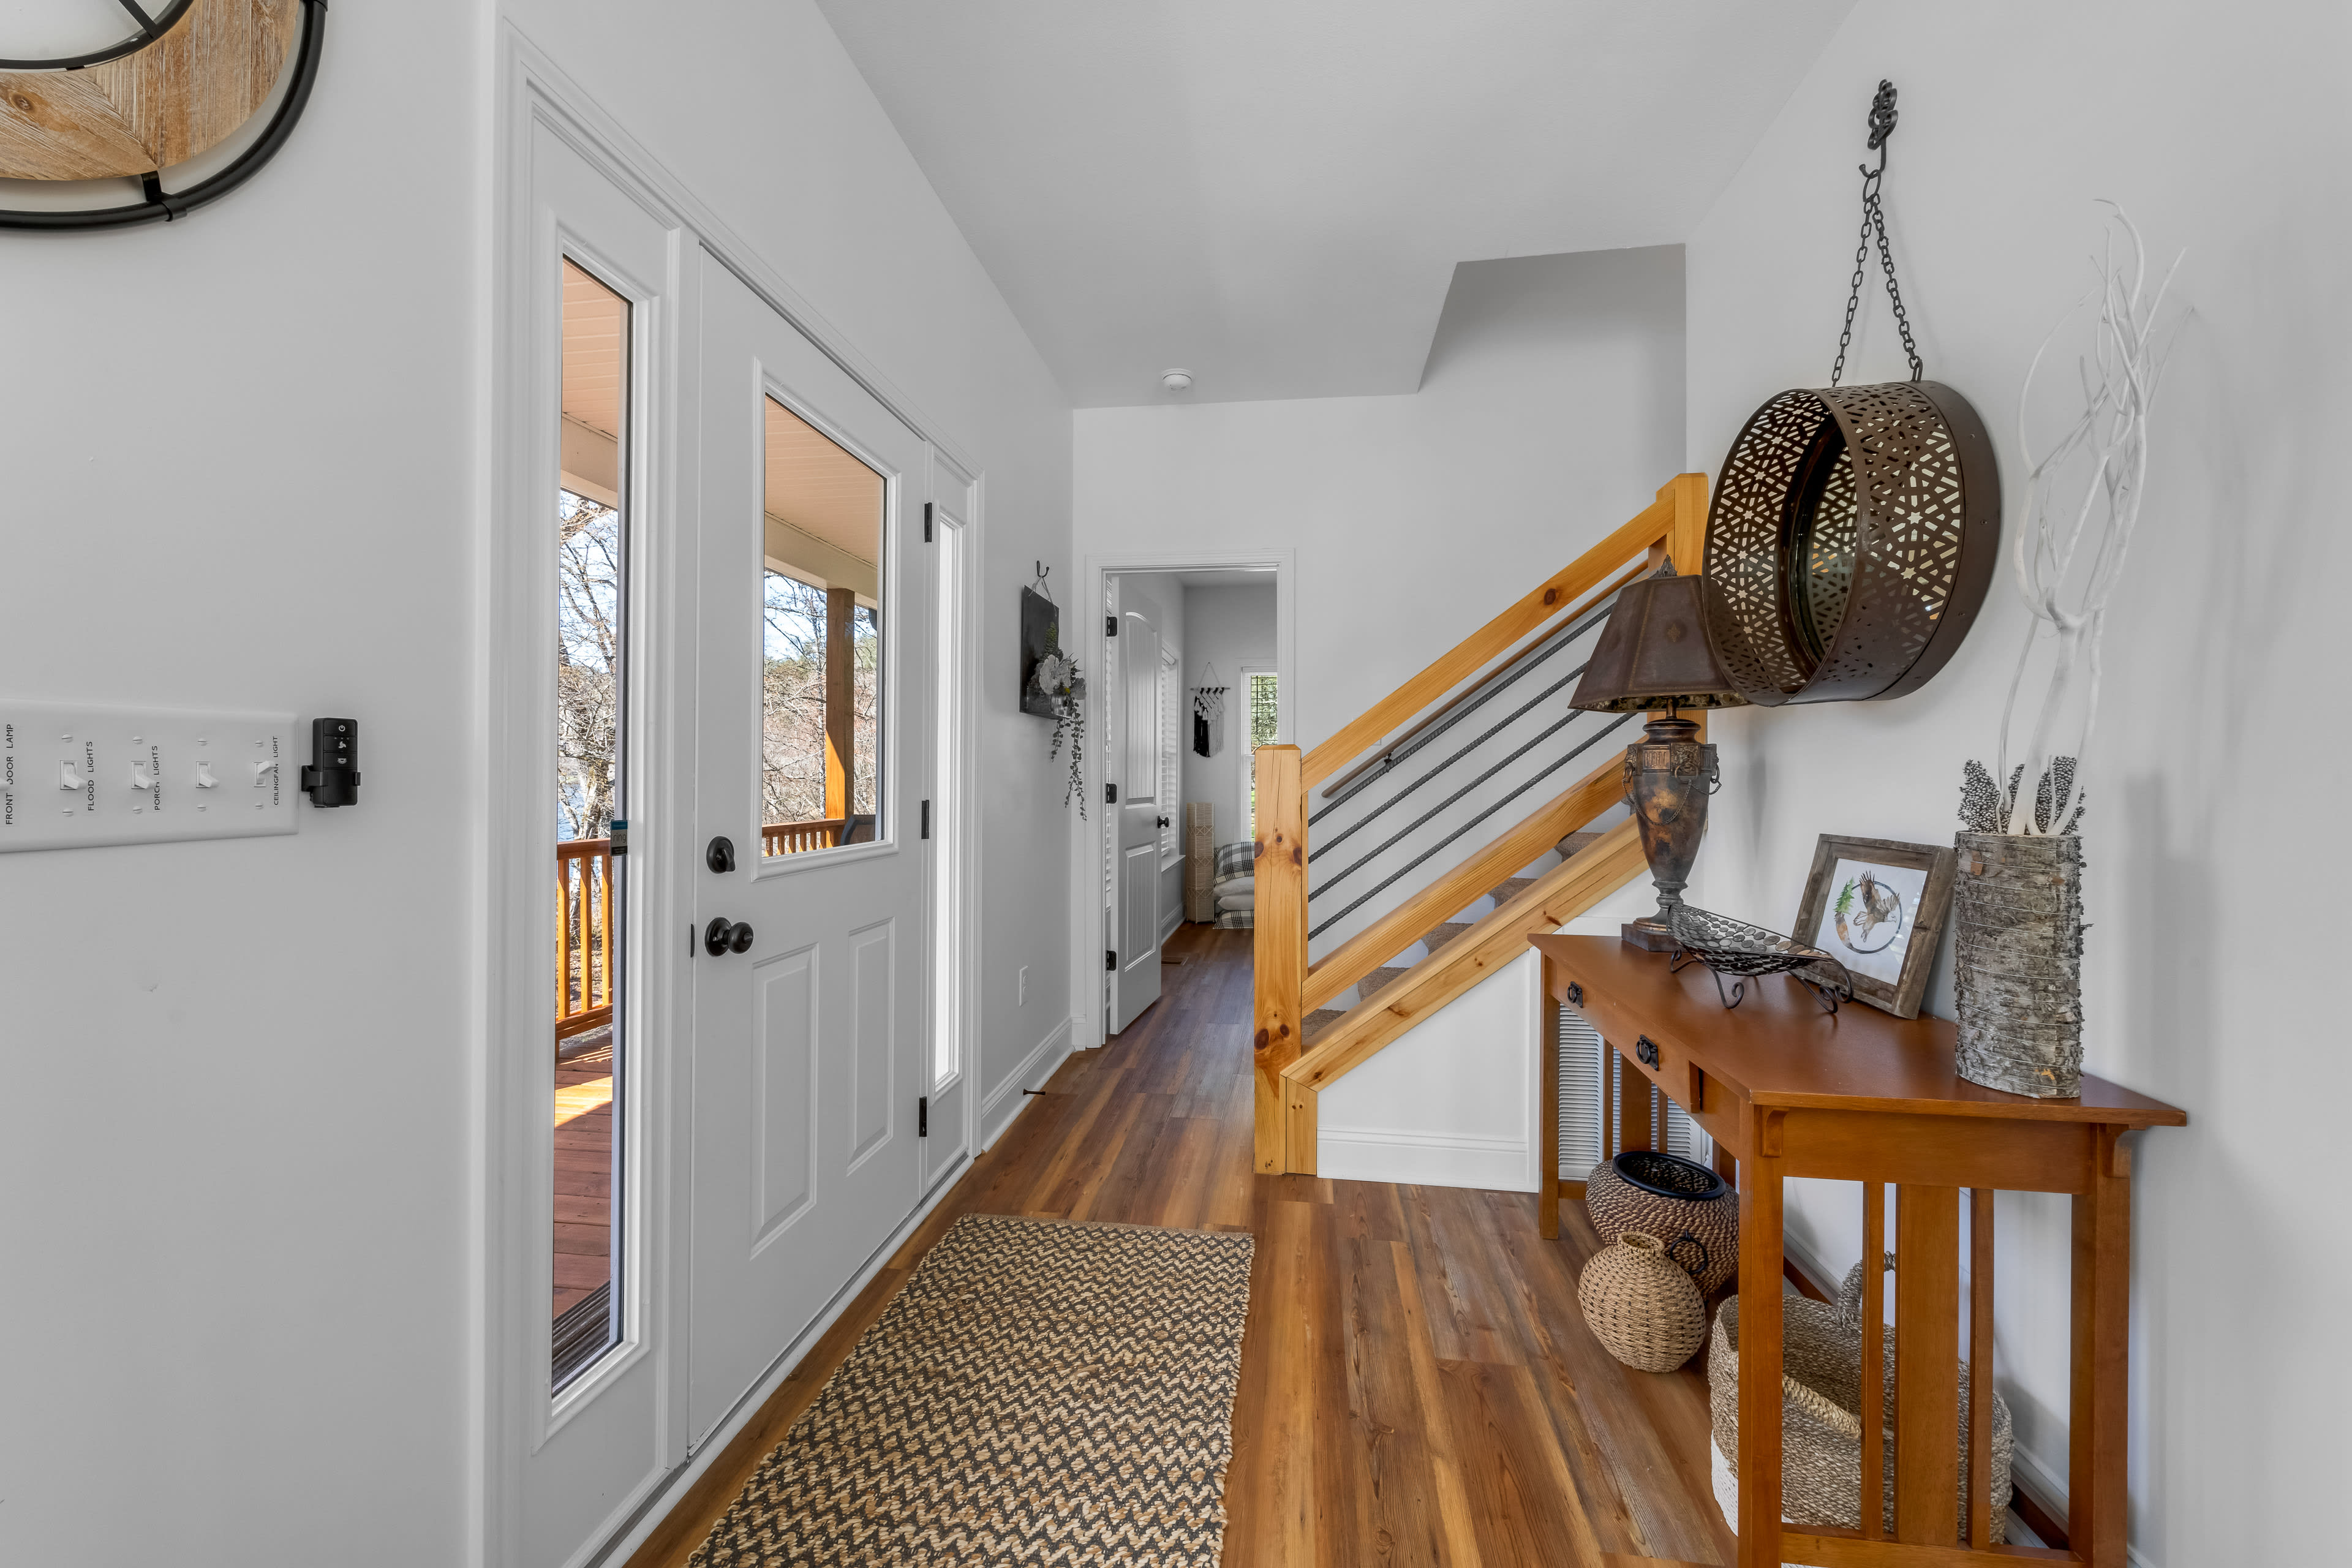 Entryway | Stairs to Upstairs Bedrooms